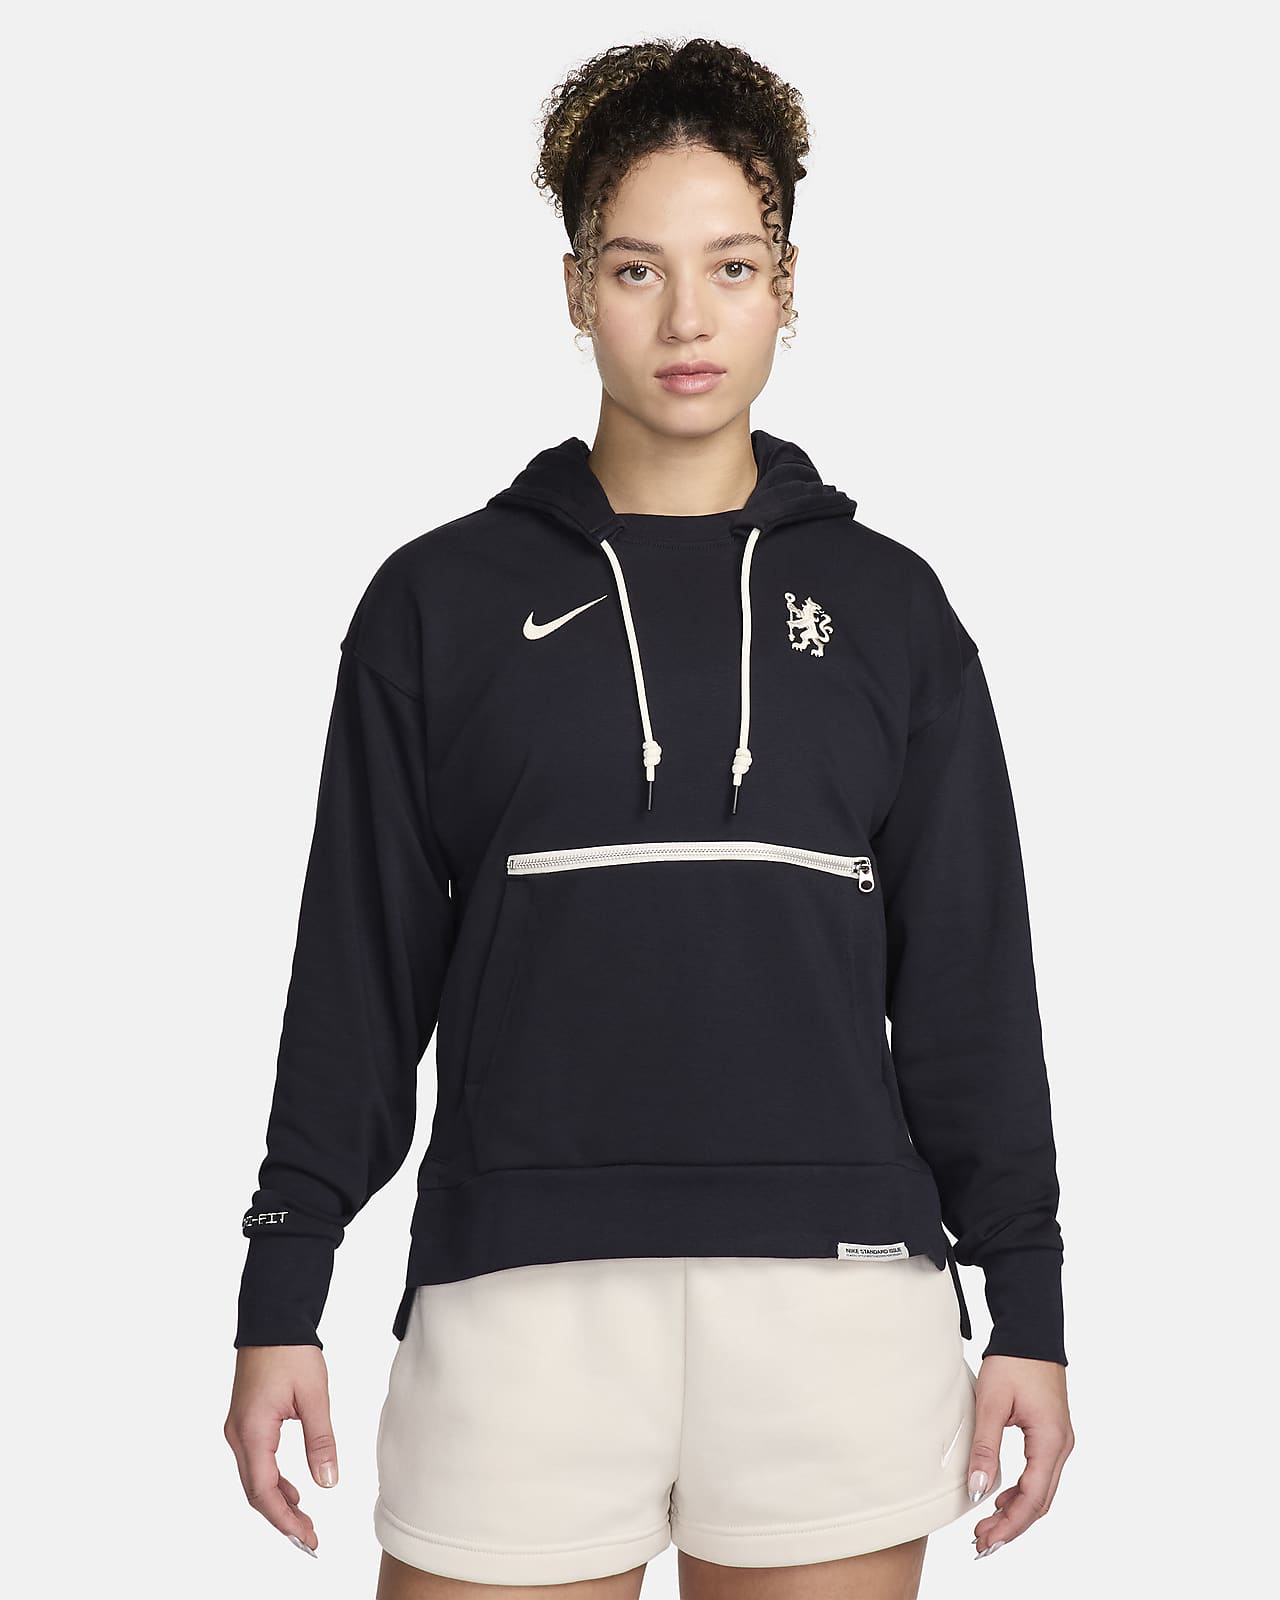 Chelsea F.C. Standard Issue Women's Nike Dri-FIT Football Graphic Pullover Hoodie